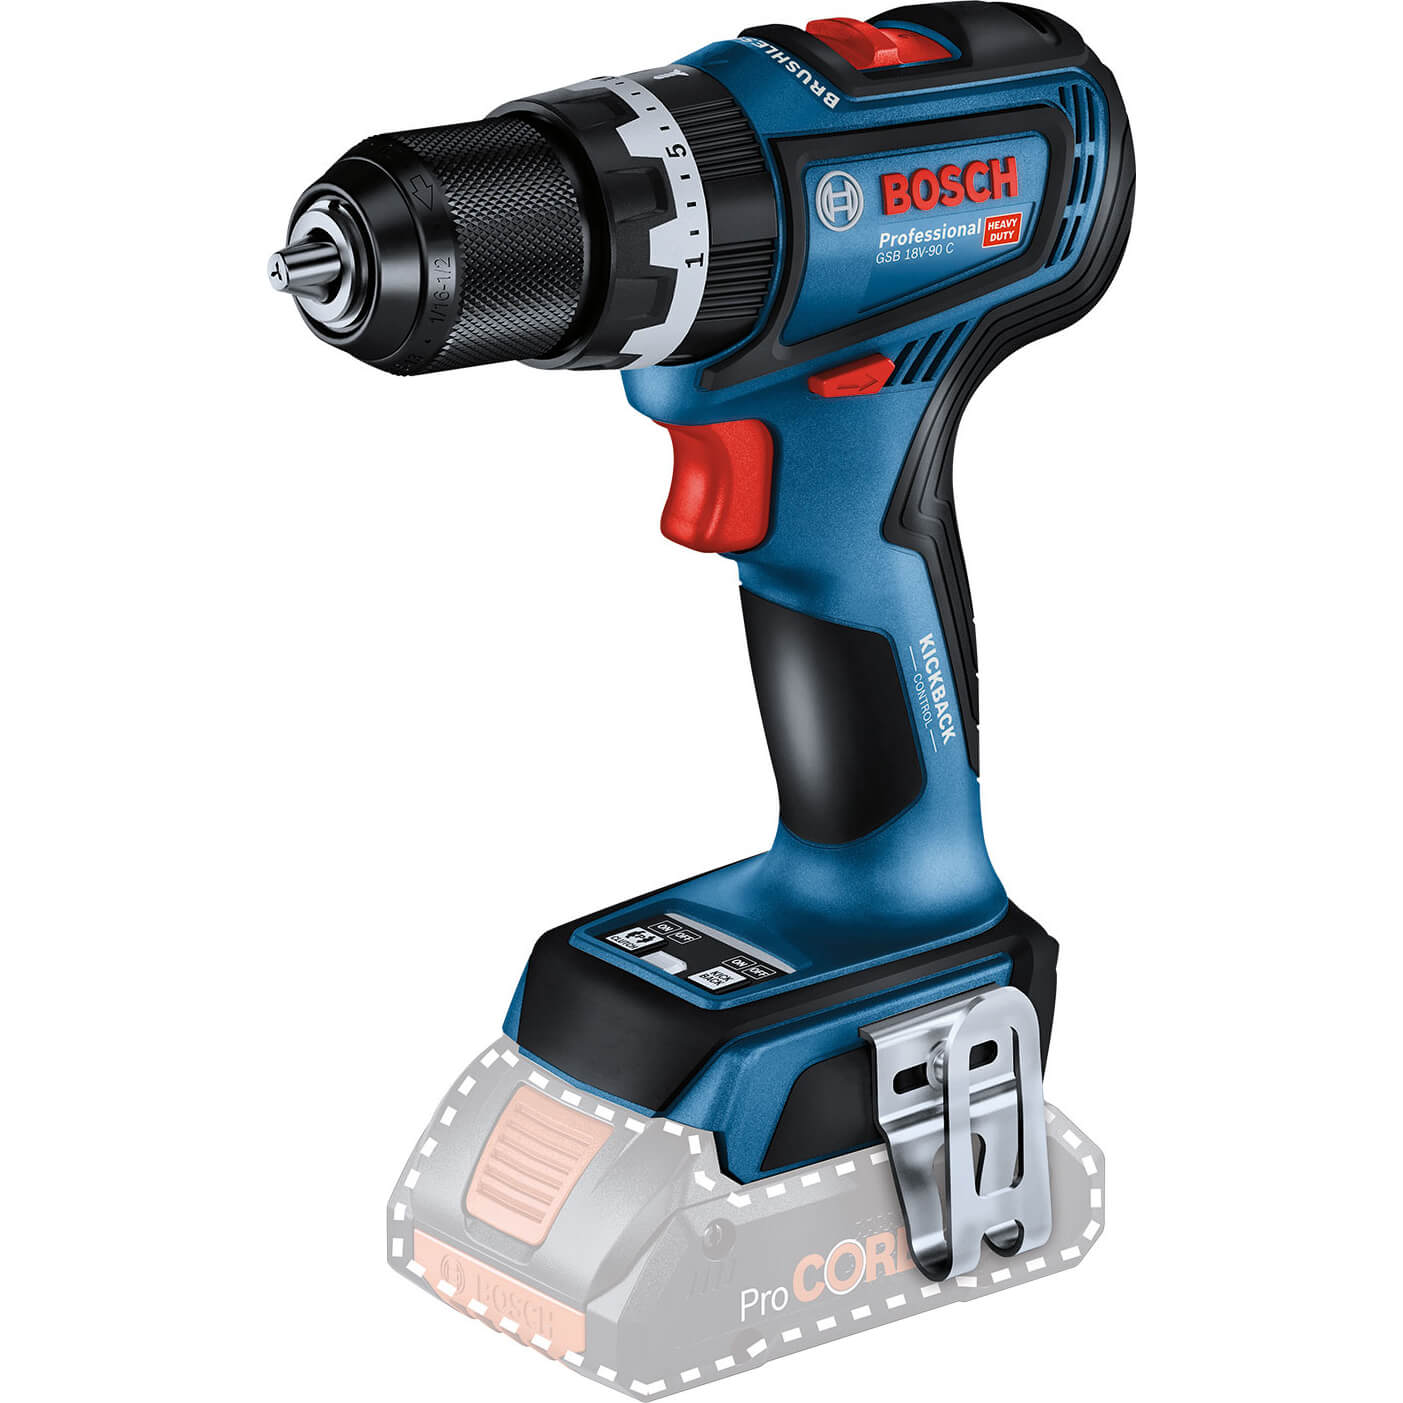 Bosch GSB 18V-90 C 18v Cordless Brushless Combi Drill With Kickback Control No Batteries No Charger No Case